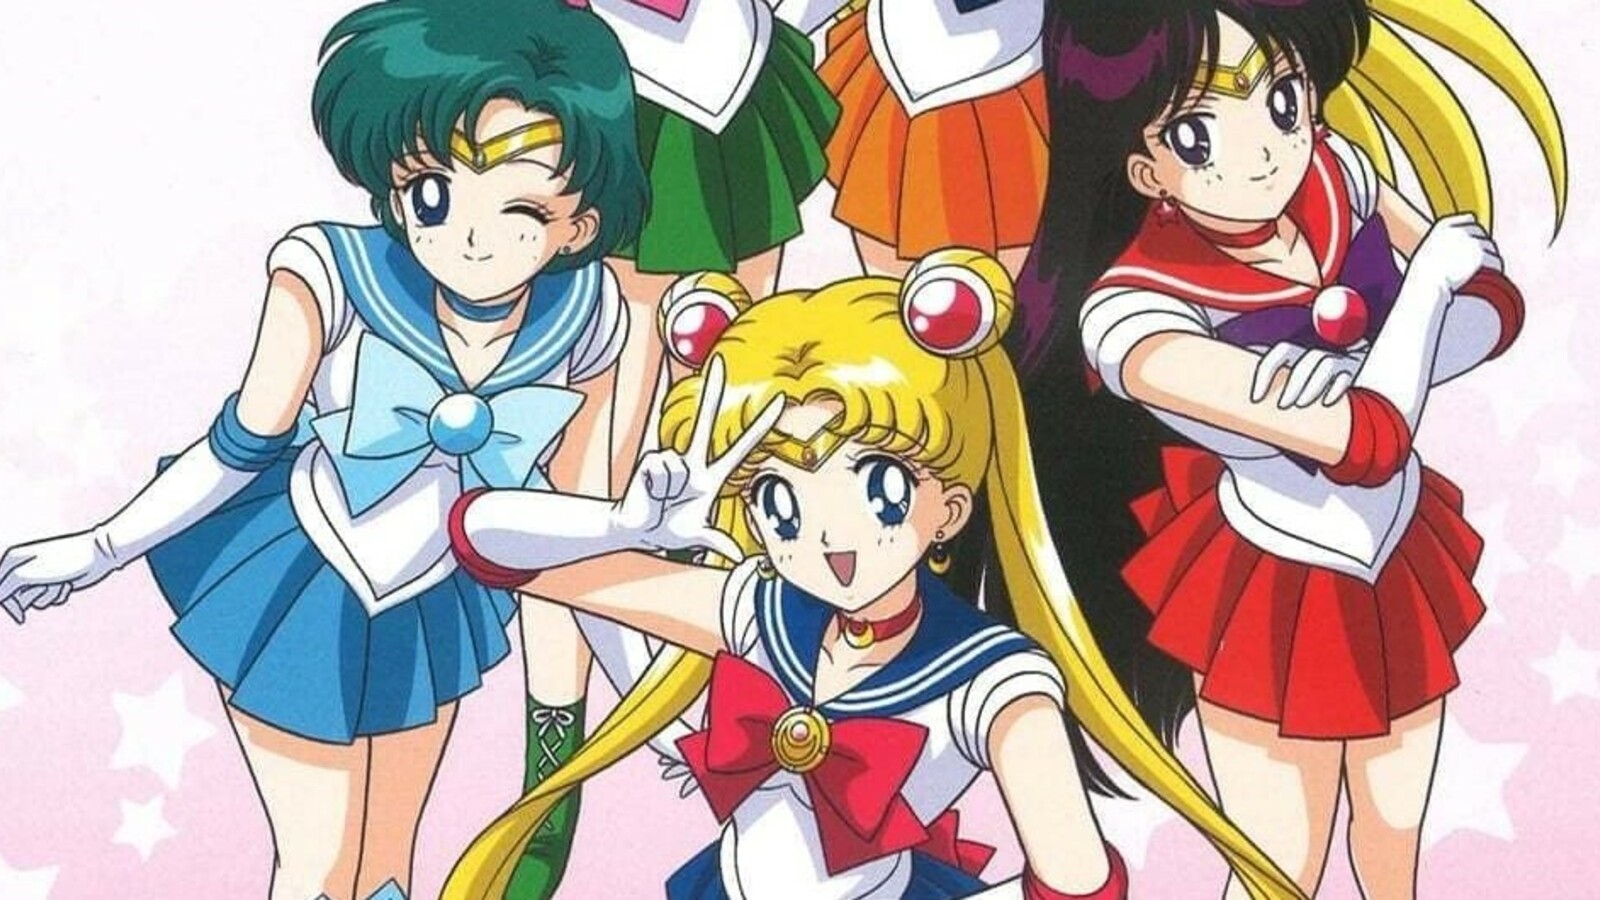 Sailor Moon watch guide: How to watch all the Sailor Moon shows and movies in order